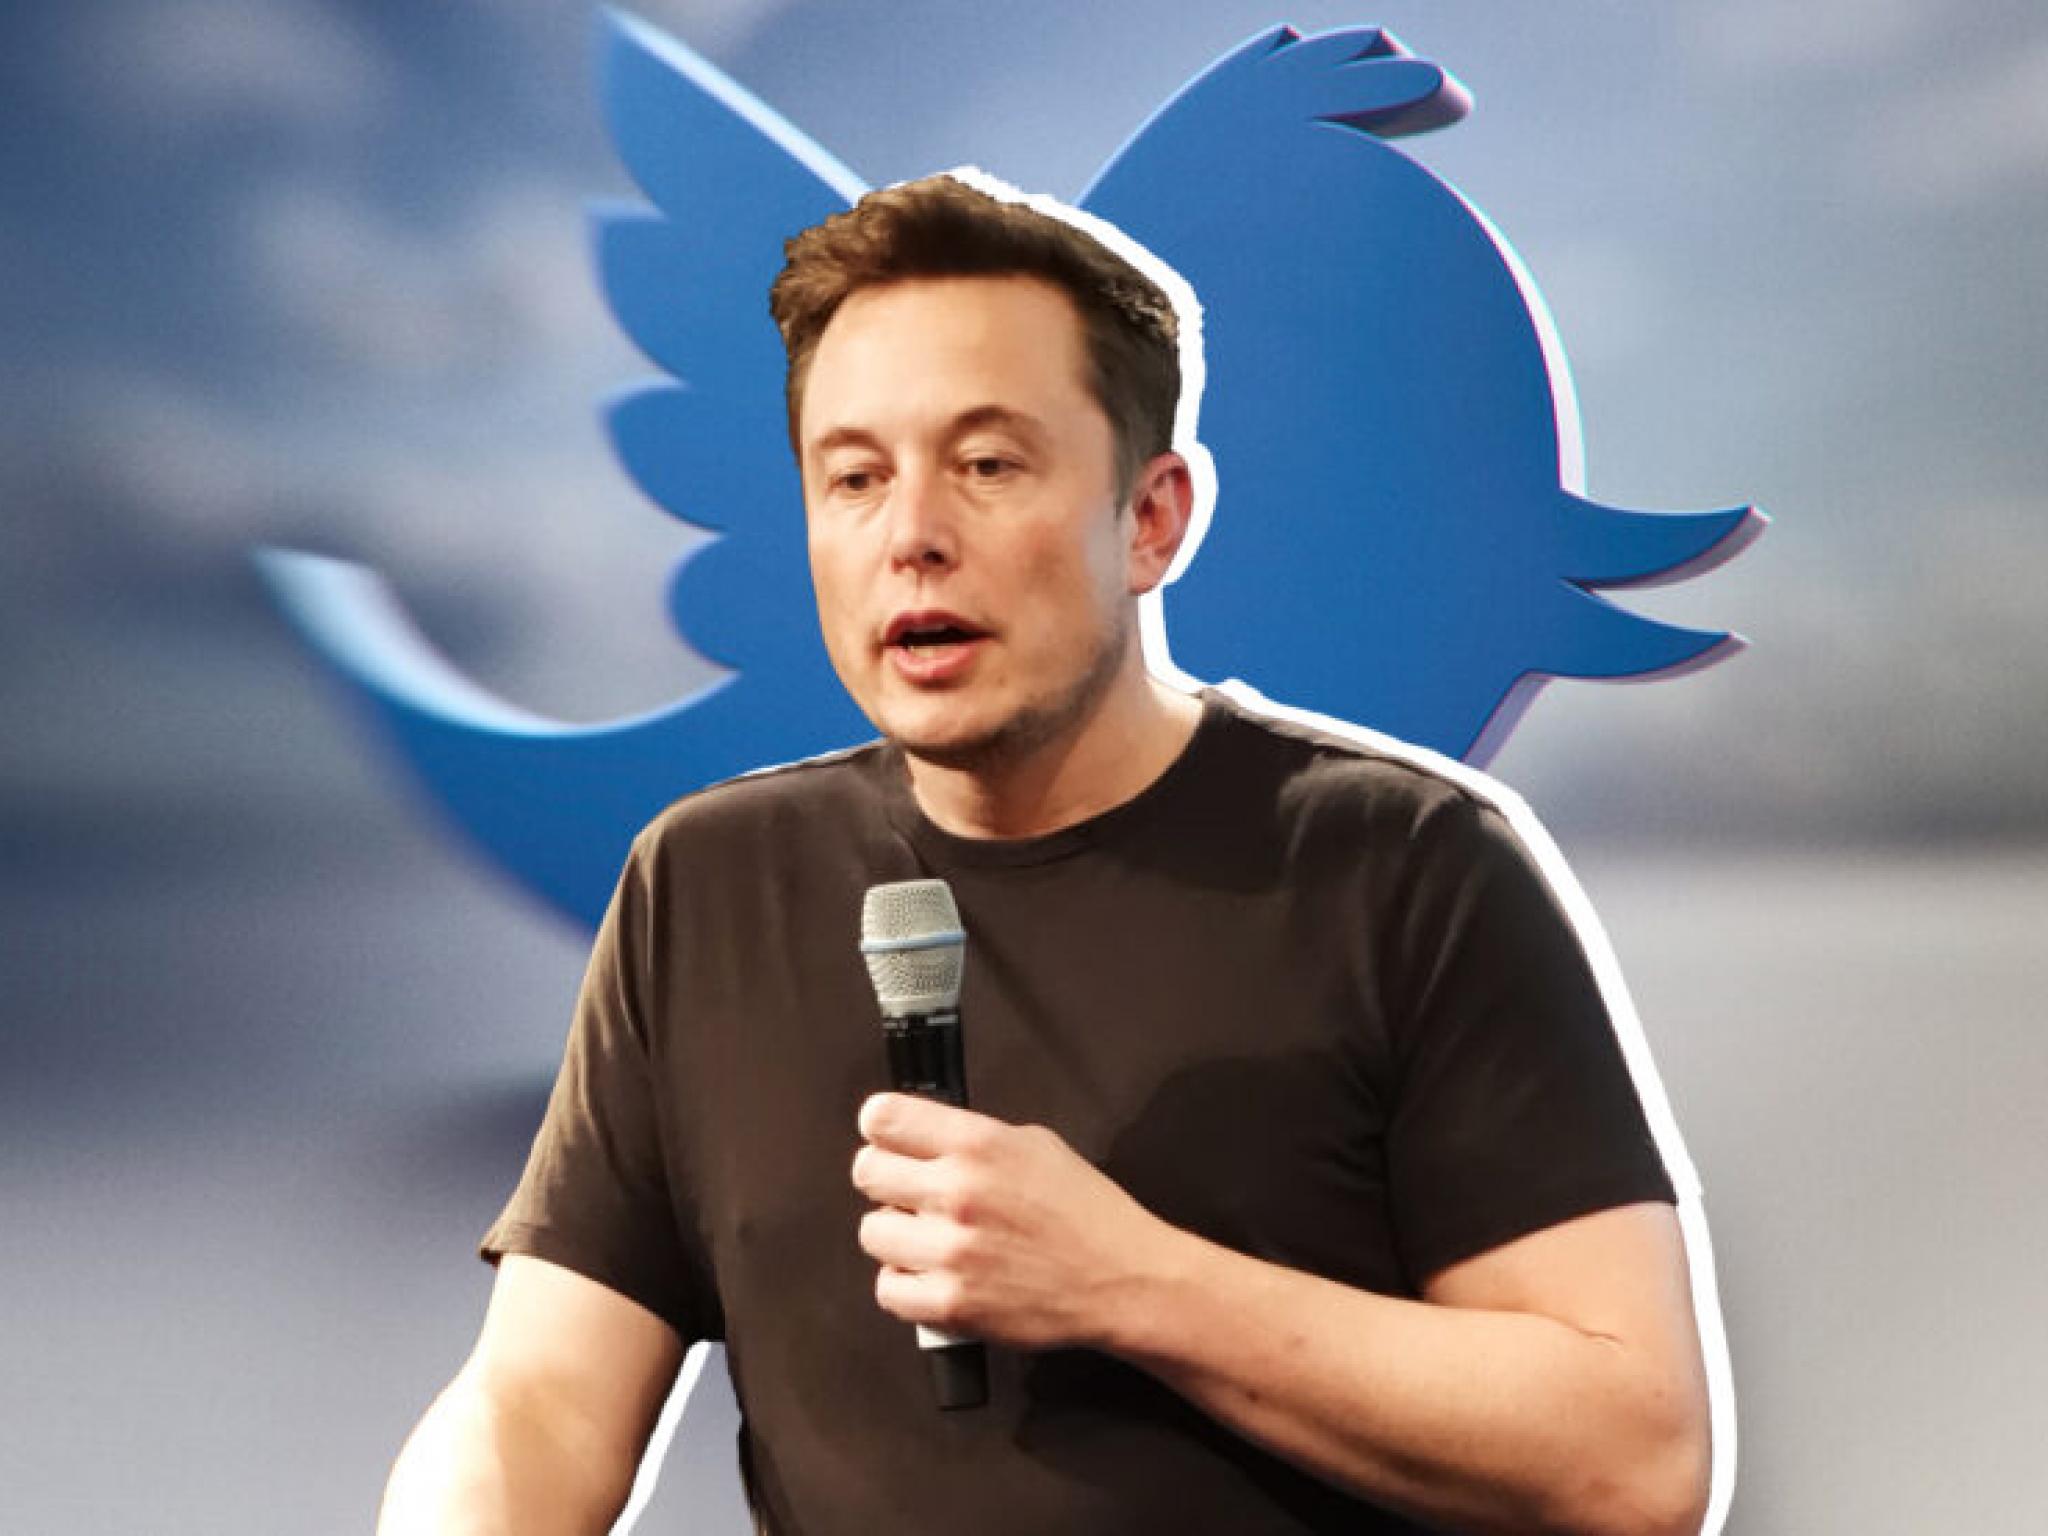  parag-agrawal-led-group-of-ex-twitter-executives-demand-elon-musk-to-pay-16m-in-legal-bills 